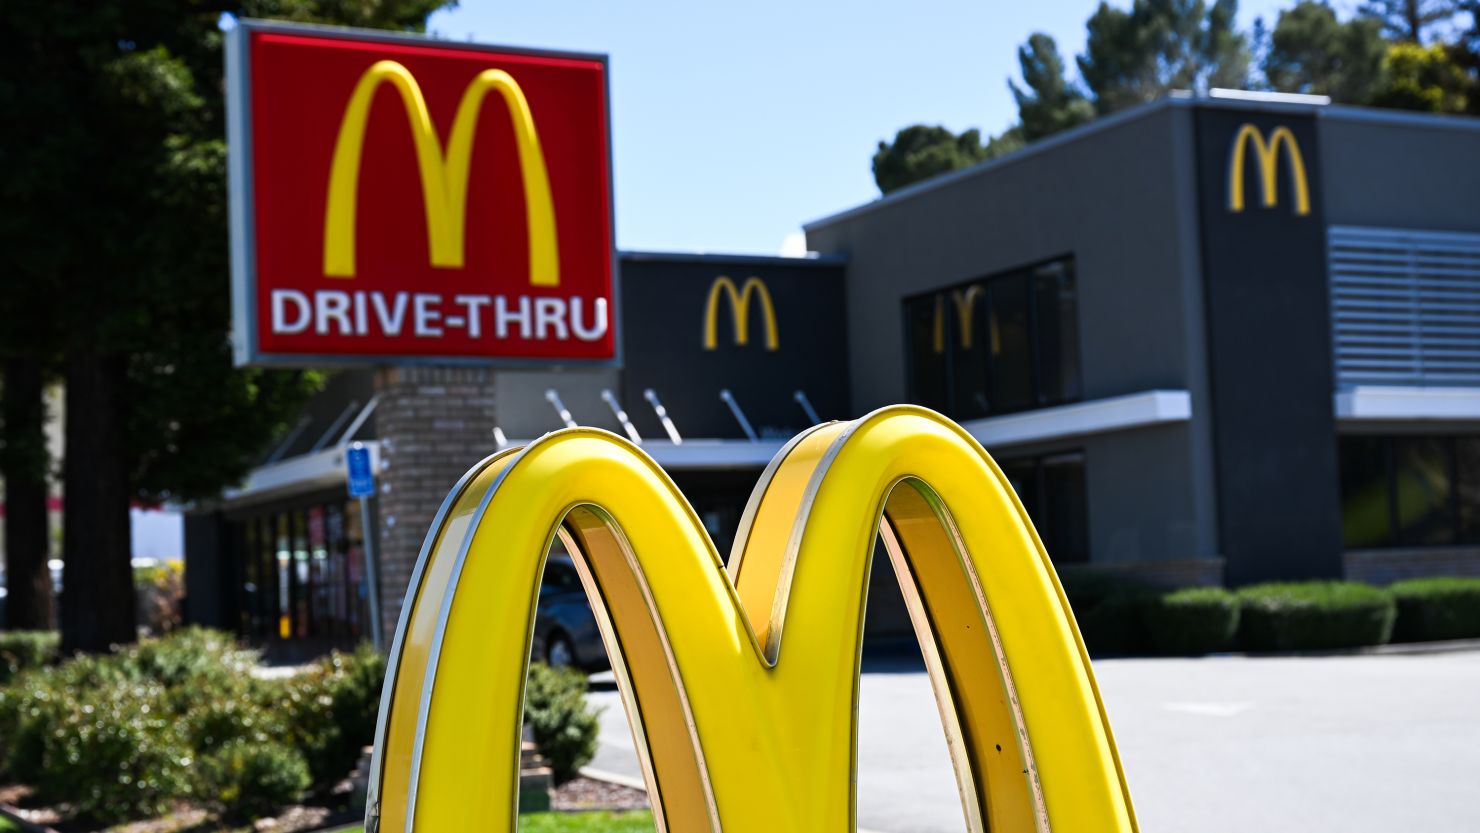 Three McDonald's franchisees that own more than 60 McDonald's locations in Kentucky, Indiana, Maryland and Ohio employed 305 children to work more than the legally permitted hours, the DOL found.